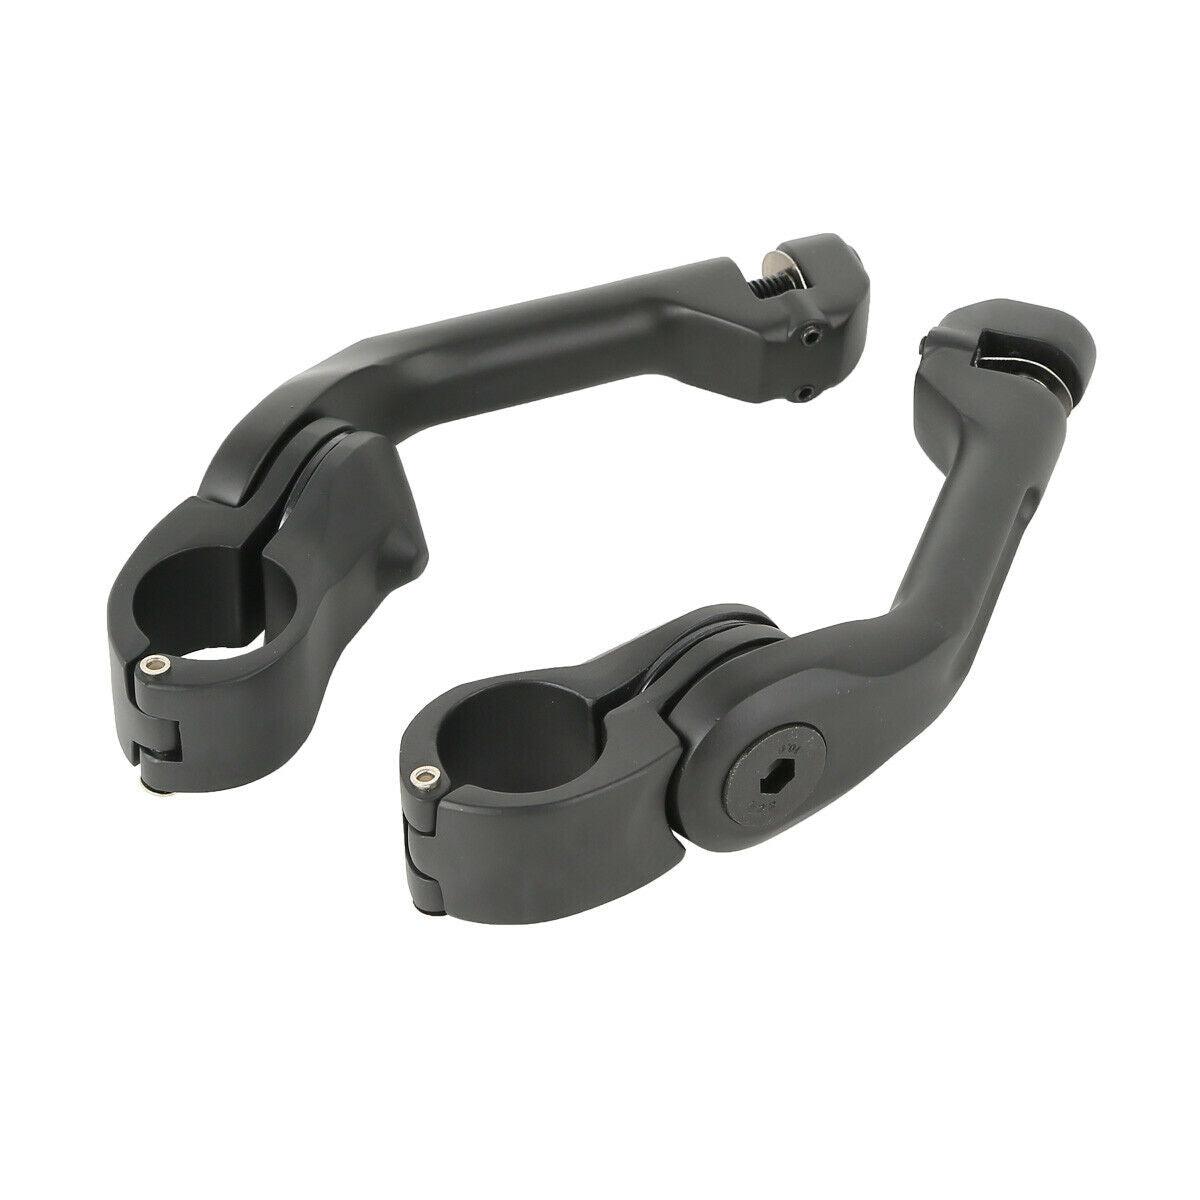 32mm Pegstreamliner Angled Highway Engine Guard FootPegs Mount Fit For Harley US - Moto Life Products